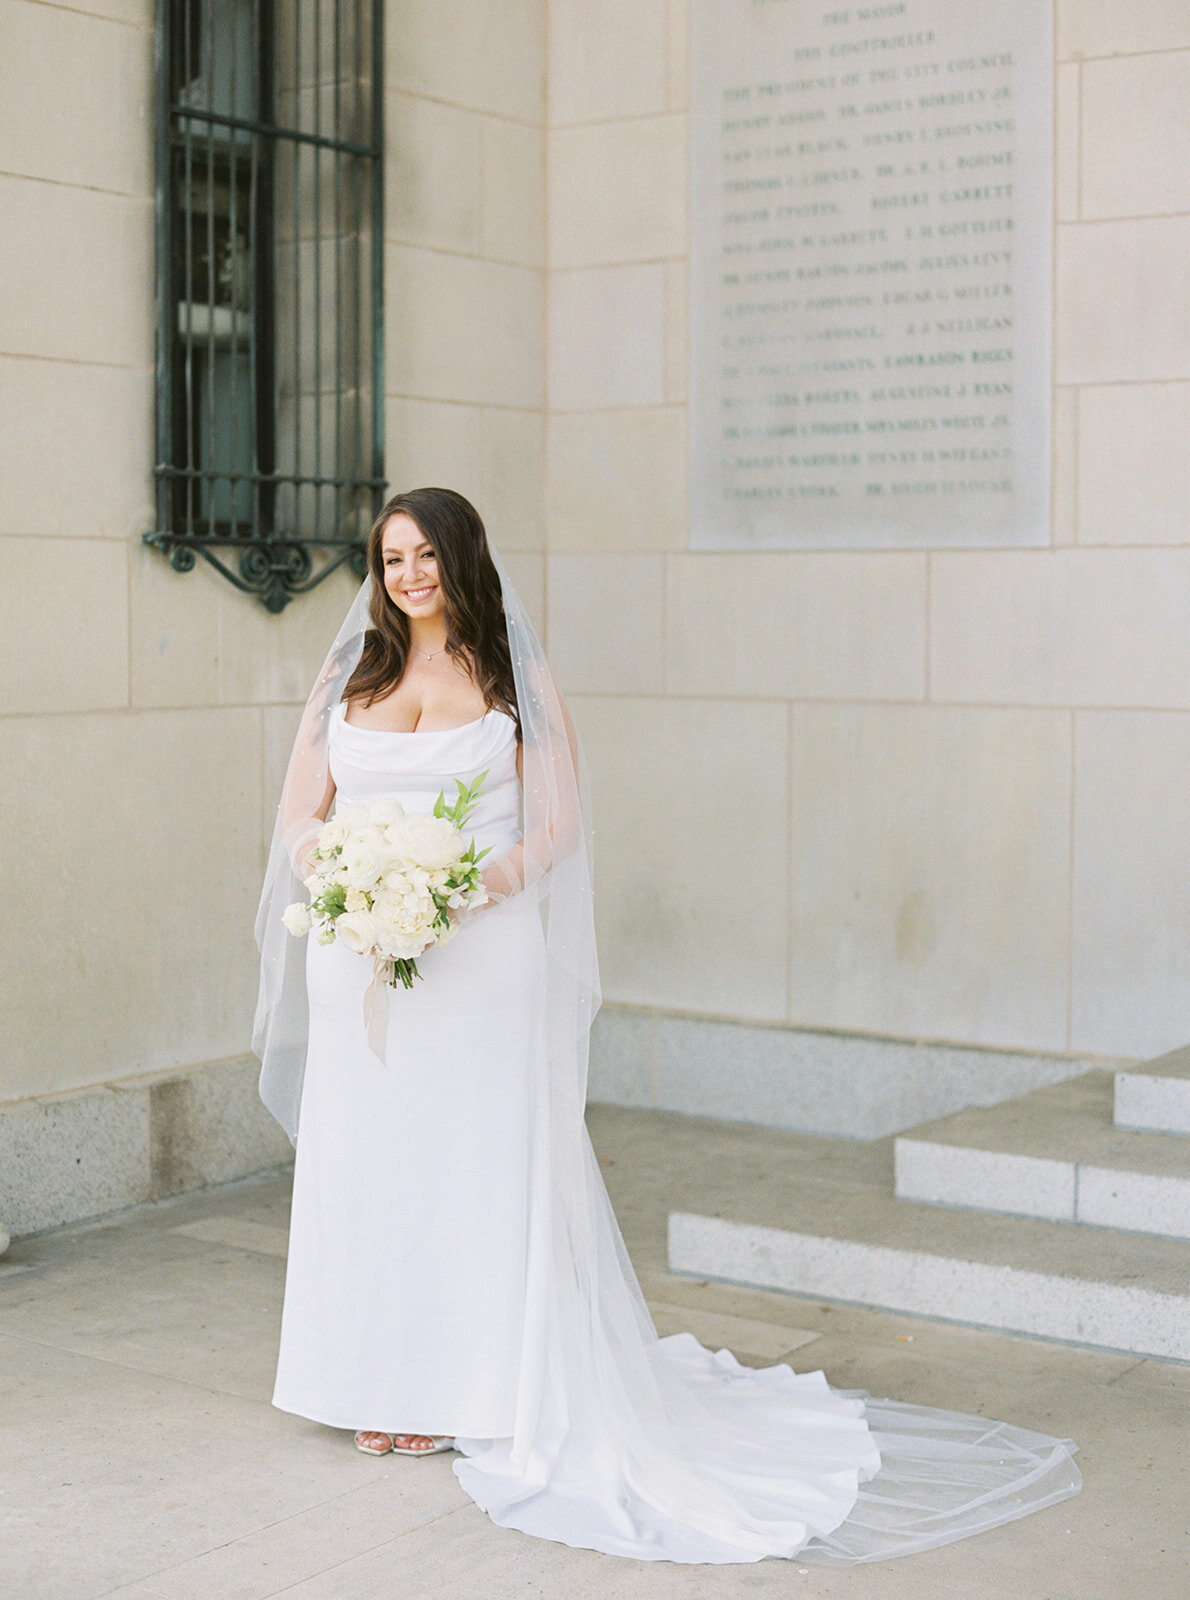 124_Kate Campbell Floral BMA Baltimore Museum of Art Wedding Portraits by Nikki Daskalakis photo